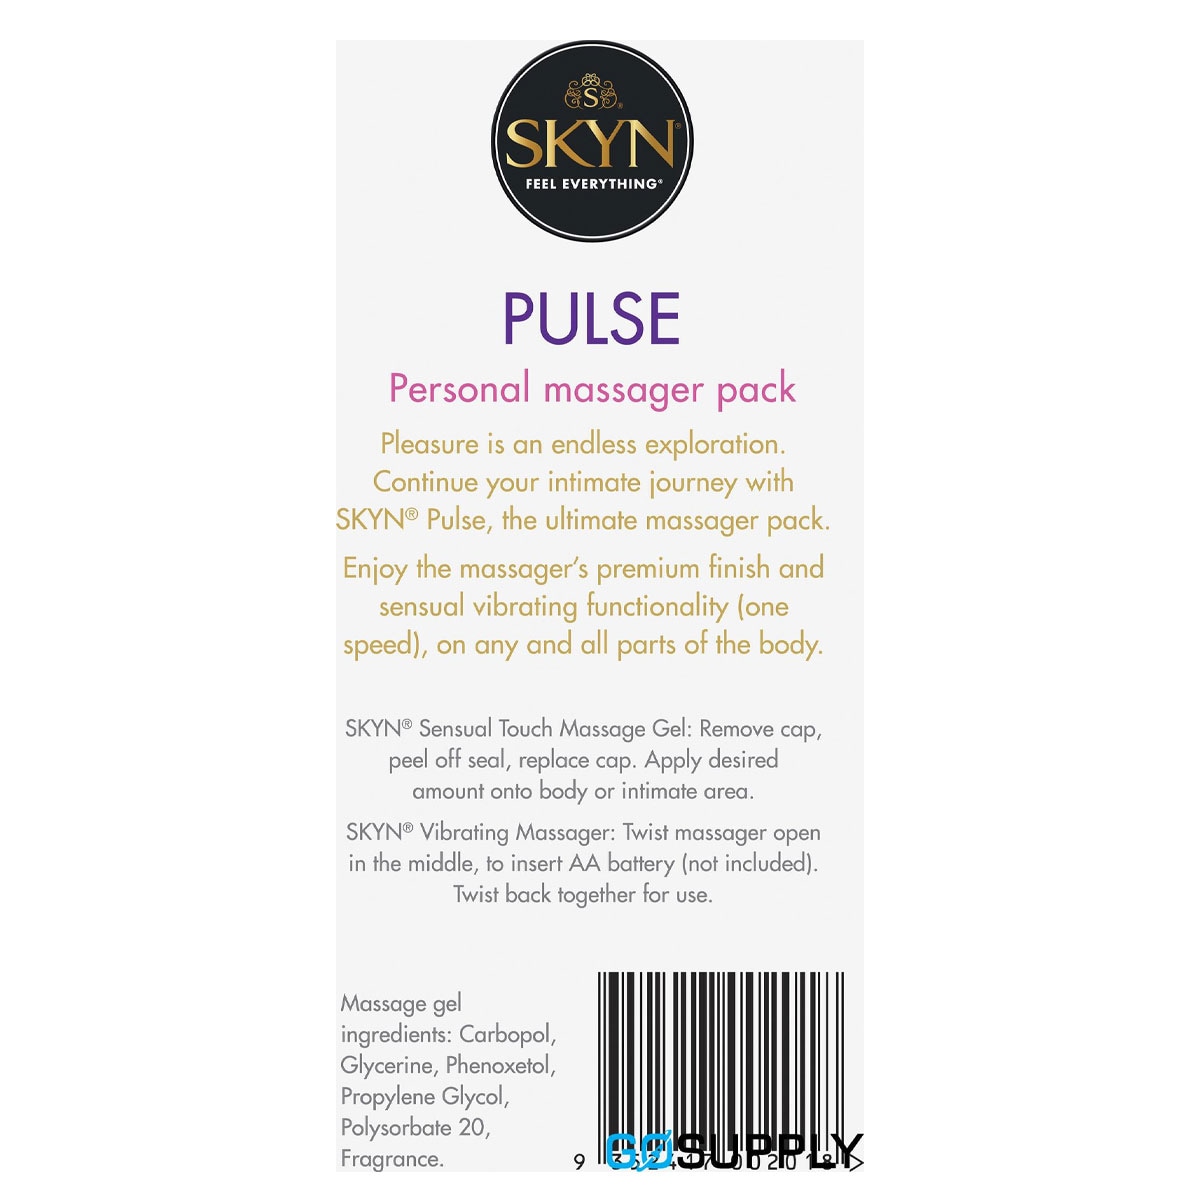 Skyn Pulse Personal Massager Pack